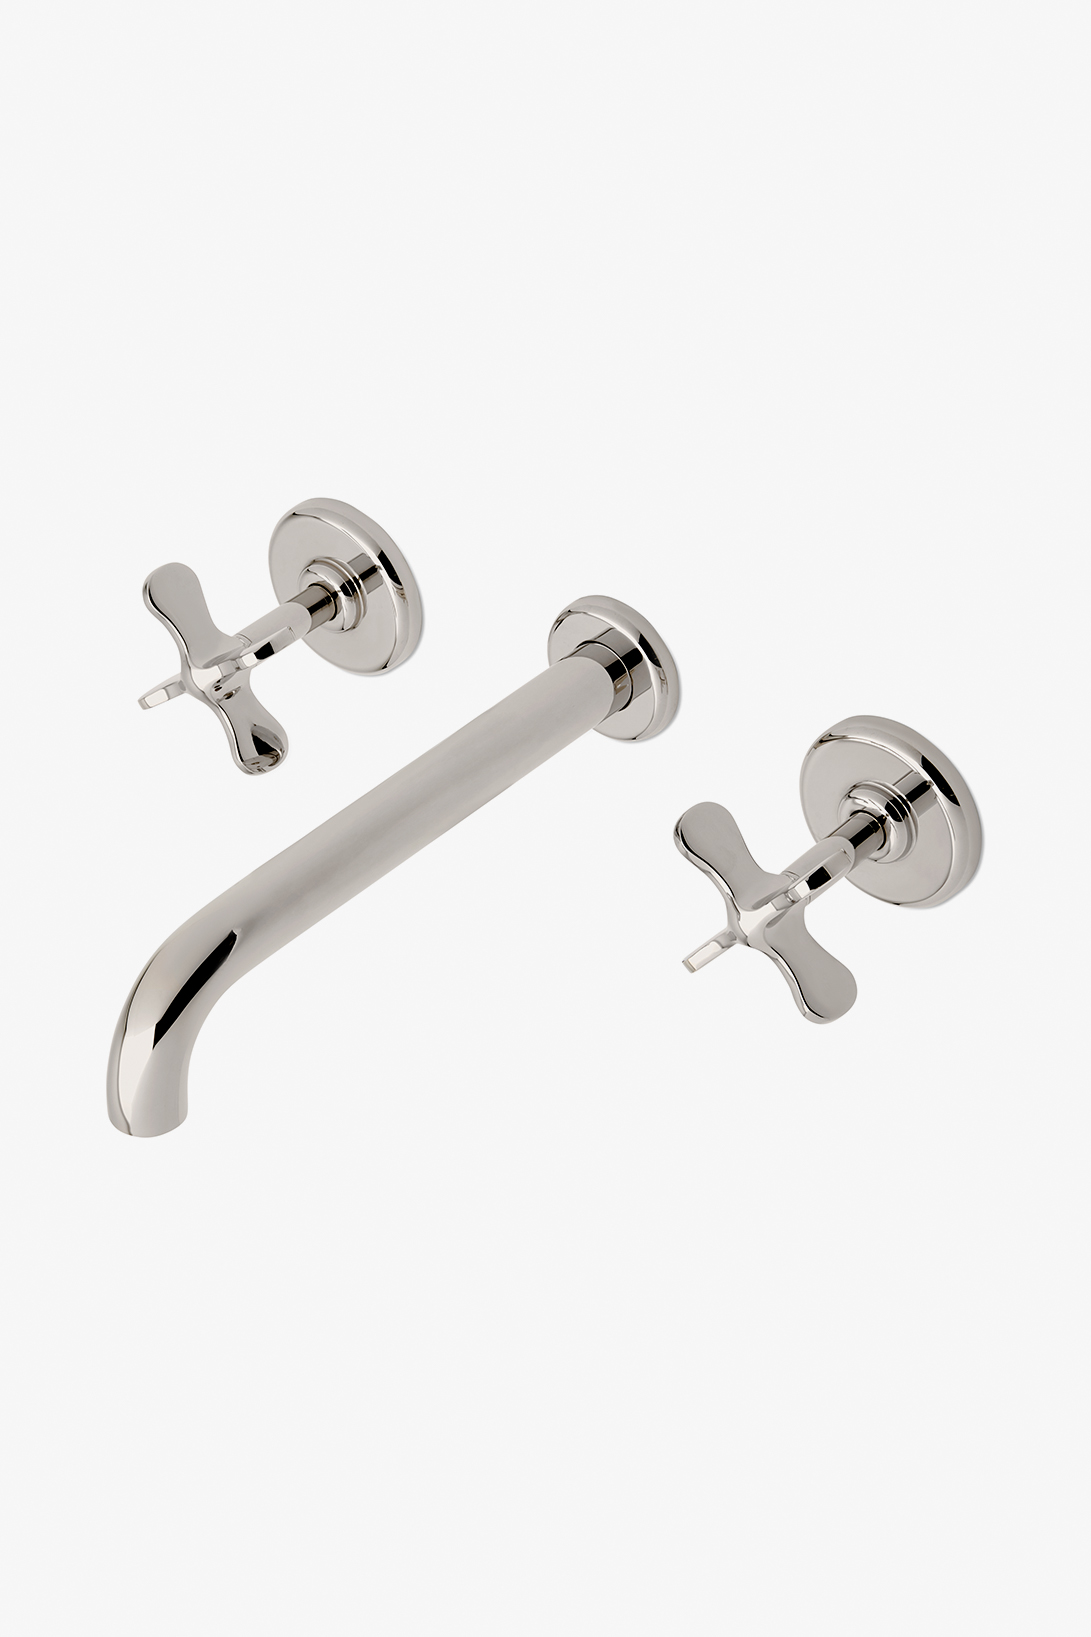 Ludlow Volta Wall Mounted Lavatory Faucet